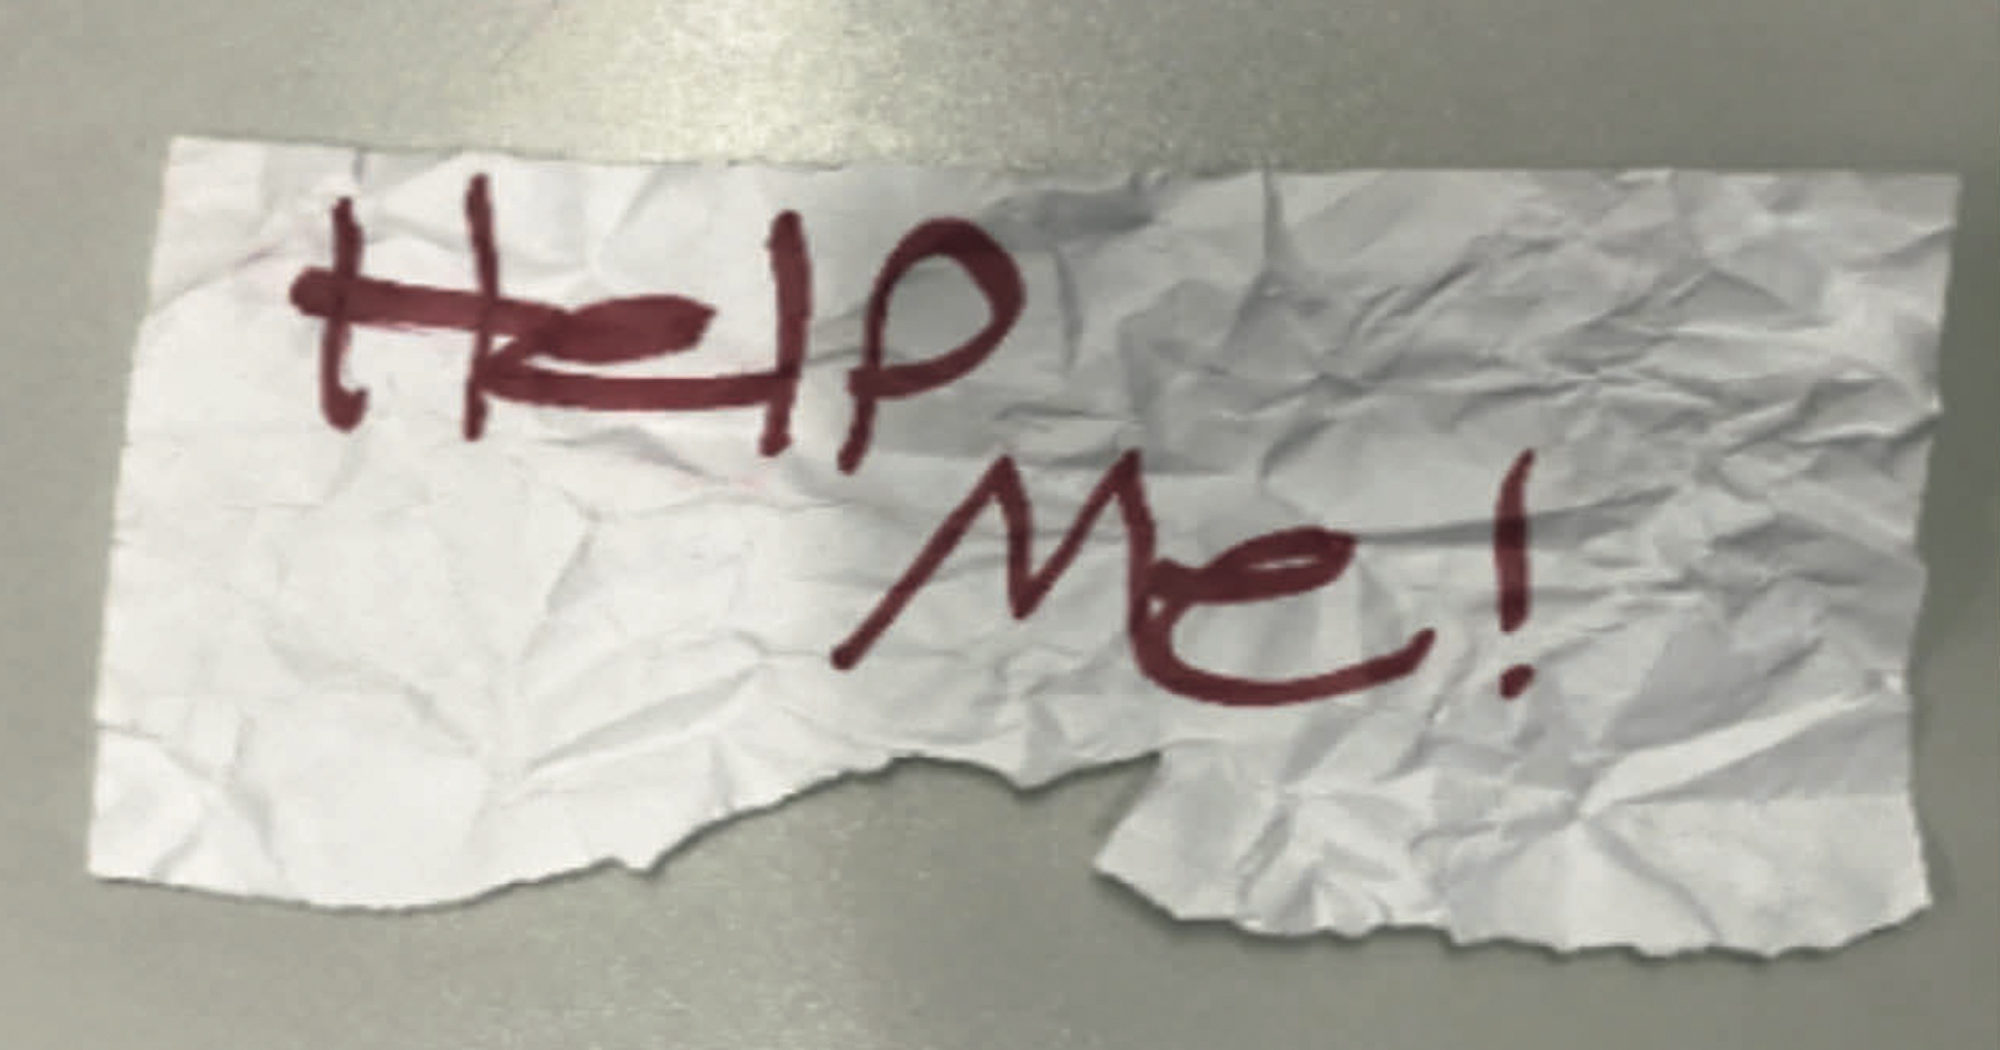 This undated photo shows a "help me" sign used by a 13-year-old girl kidnapped in Texas.